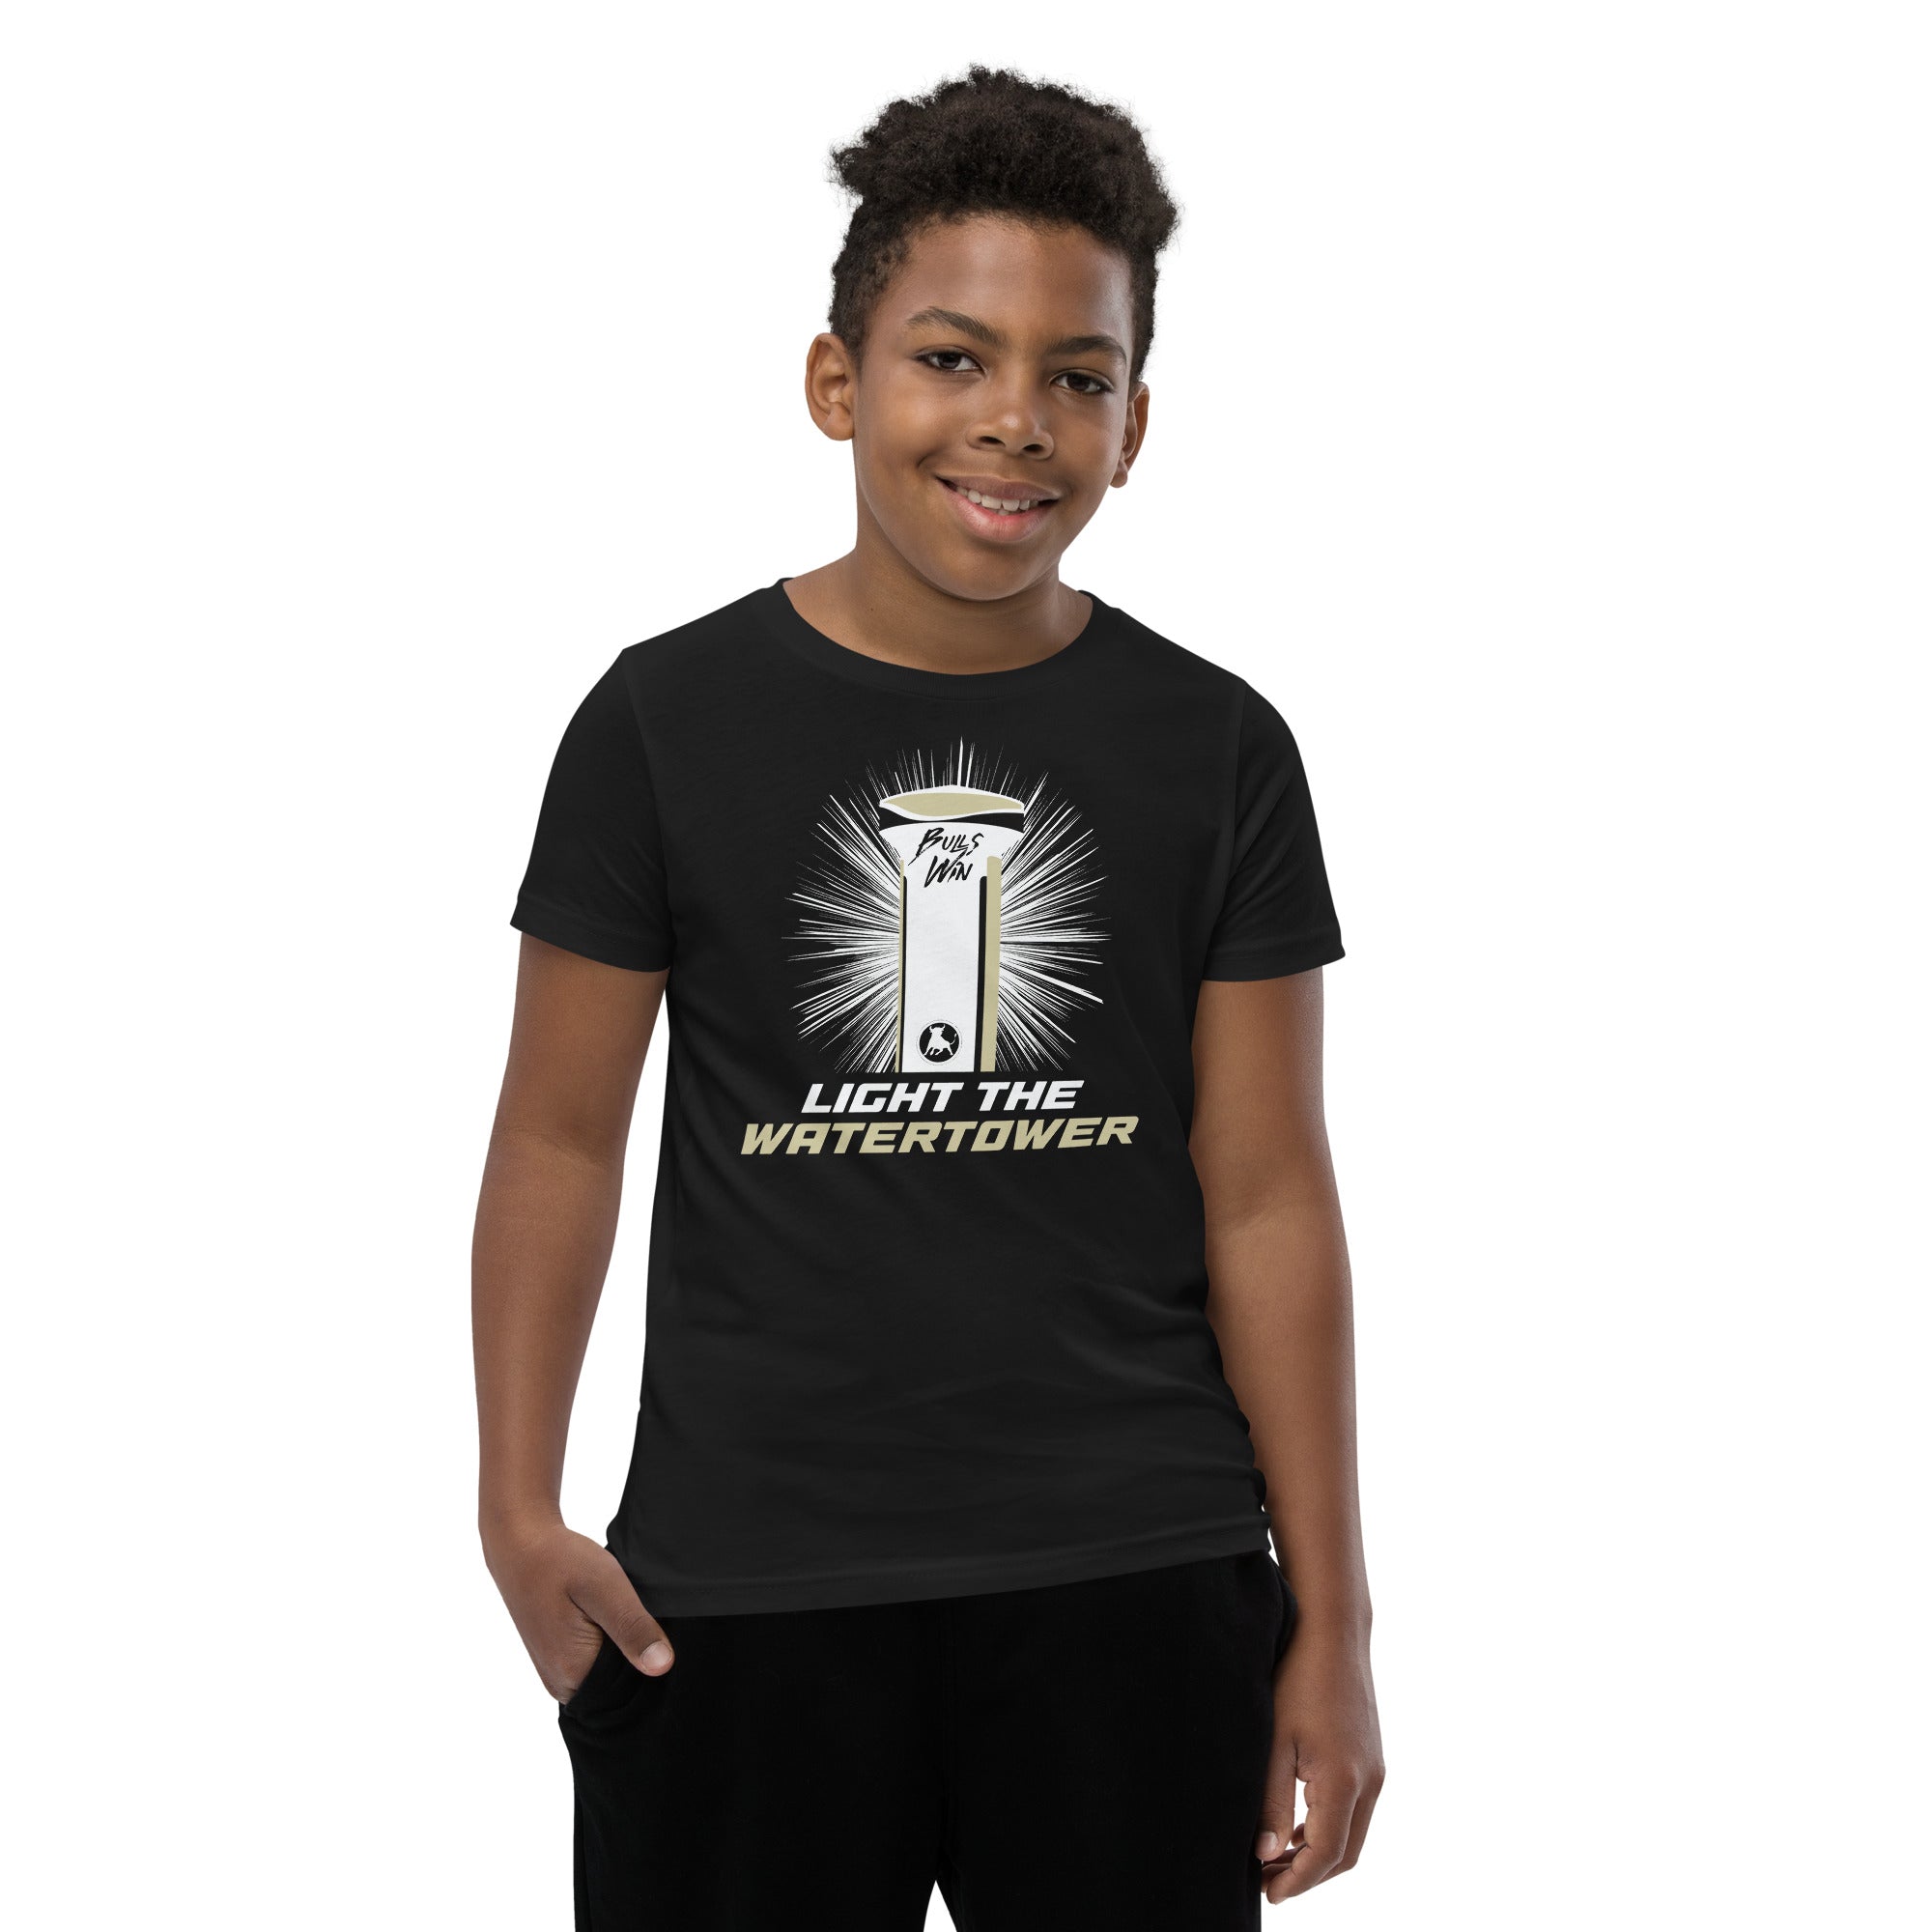 Light the Watertower - Youth Short Sleeve T-Shirt